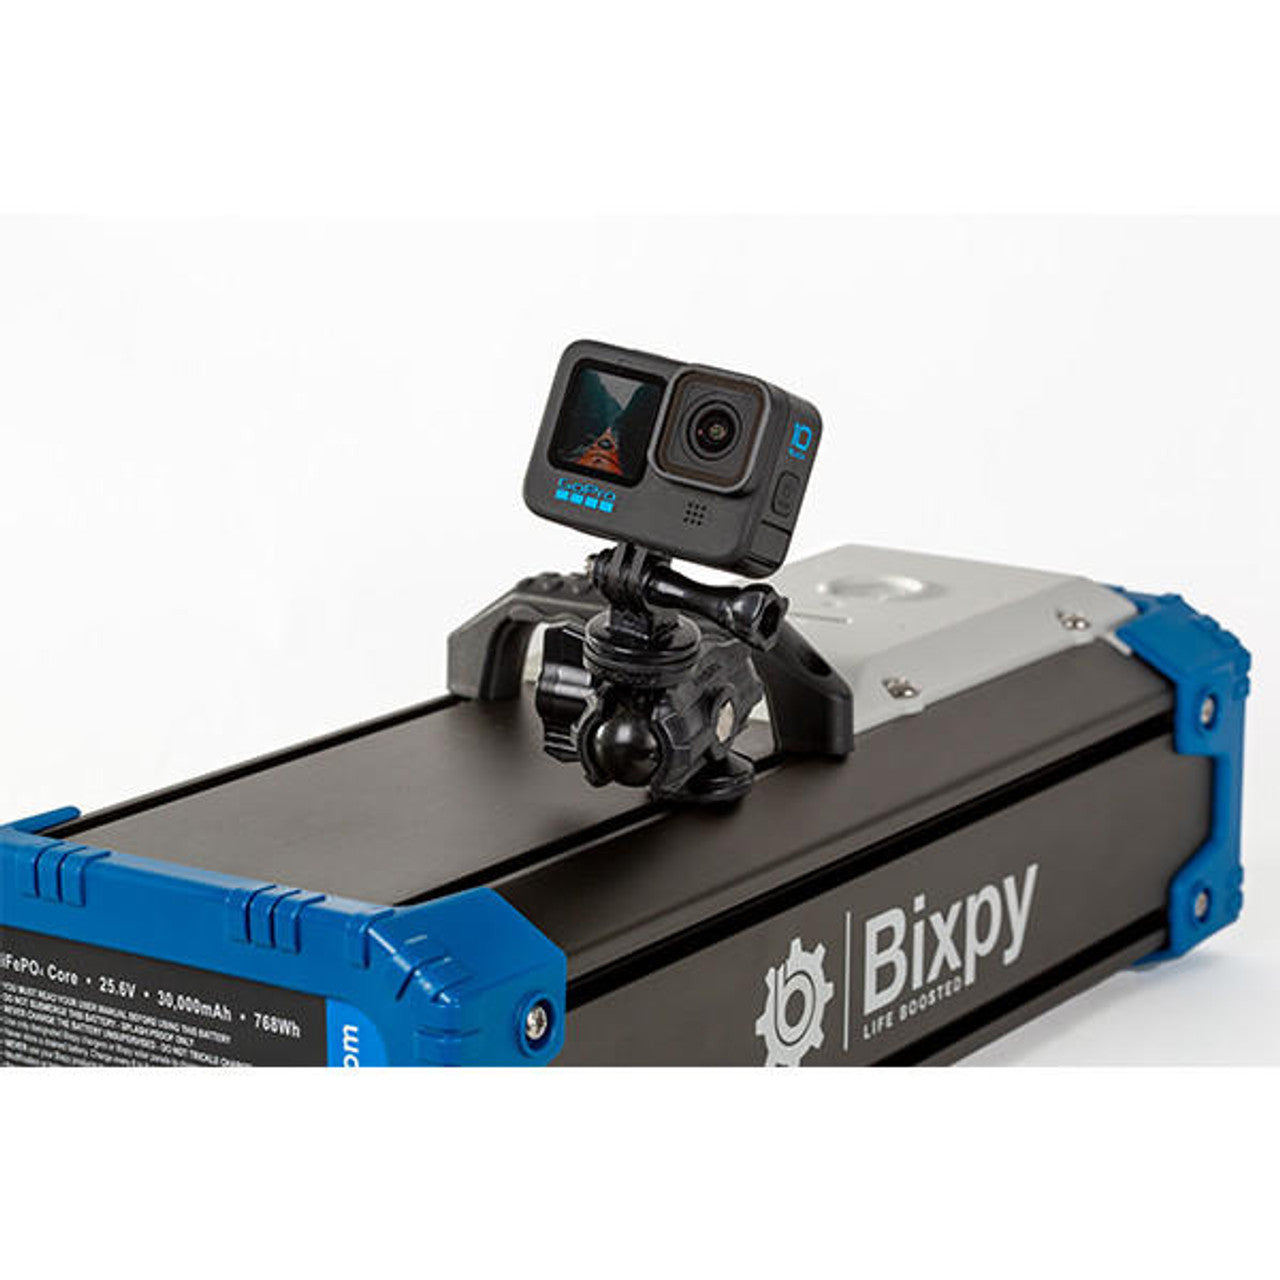 Bixpy PWC Motors PP-768 Outboard Battery (Pre-order Only)